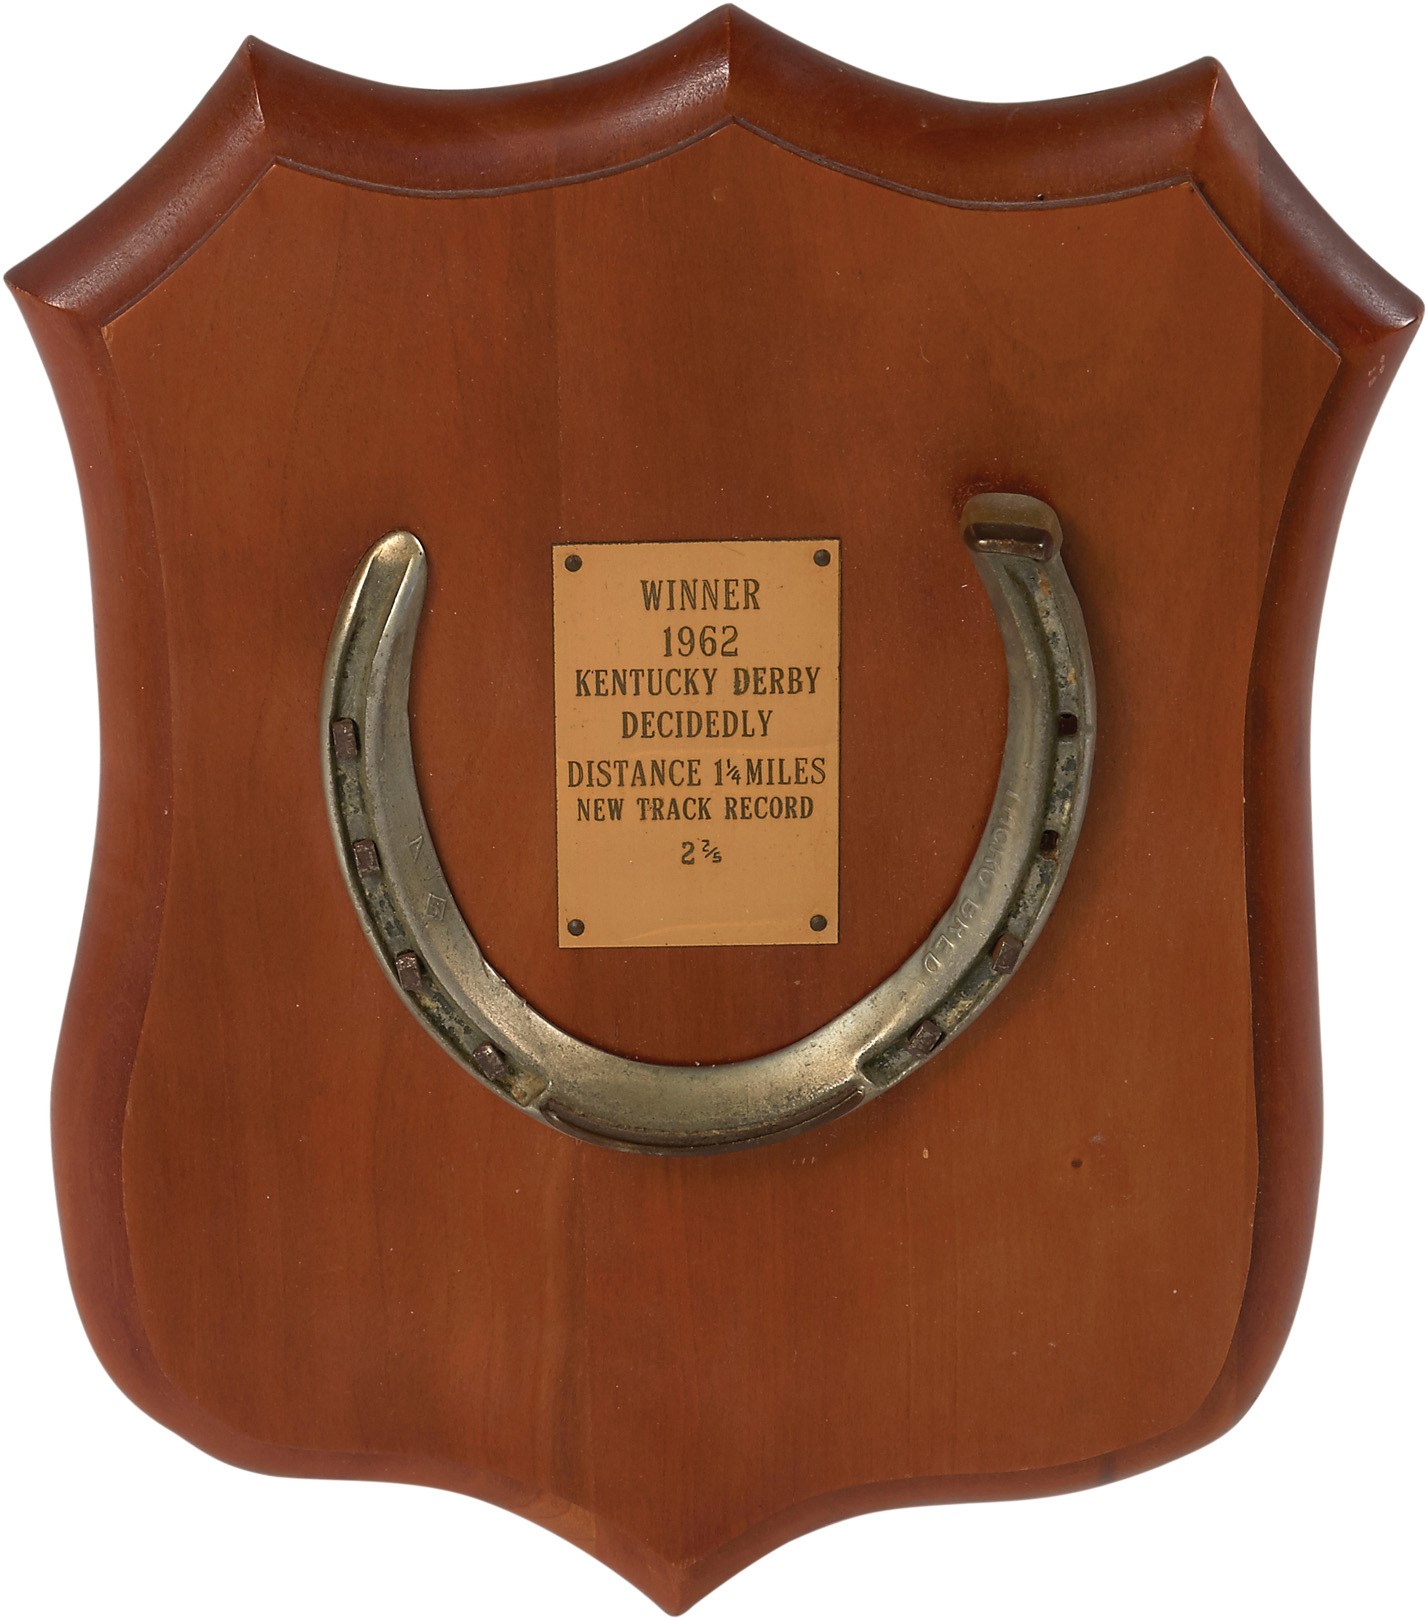 1962 "Decidedly" Kentucky Derby Record Breaking Horseshoe ("New Track Record")